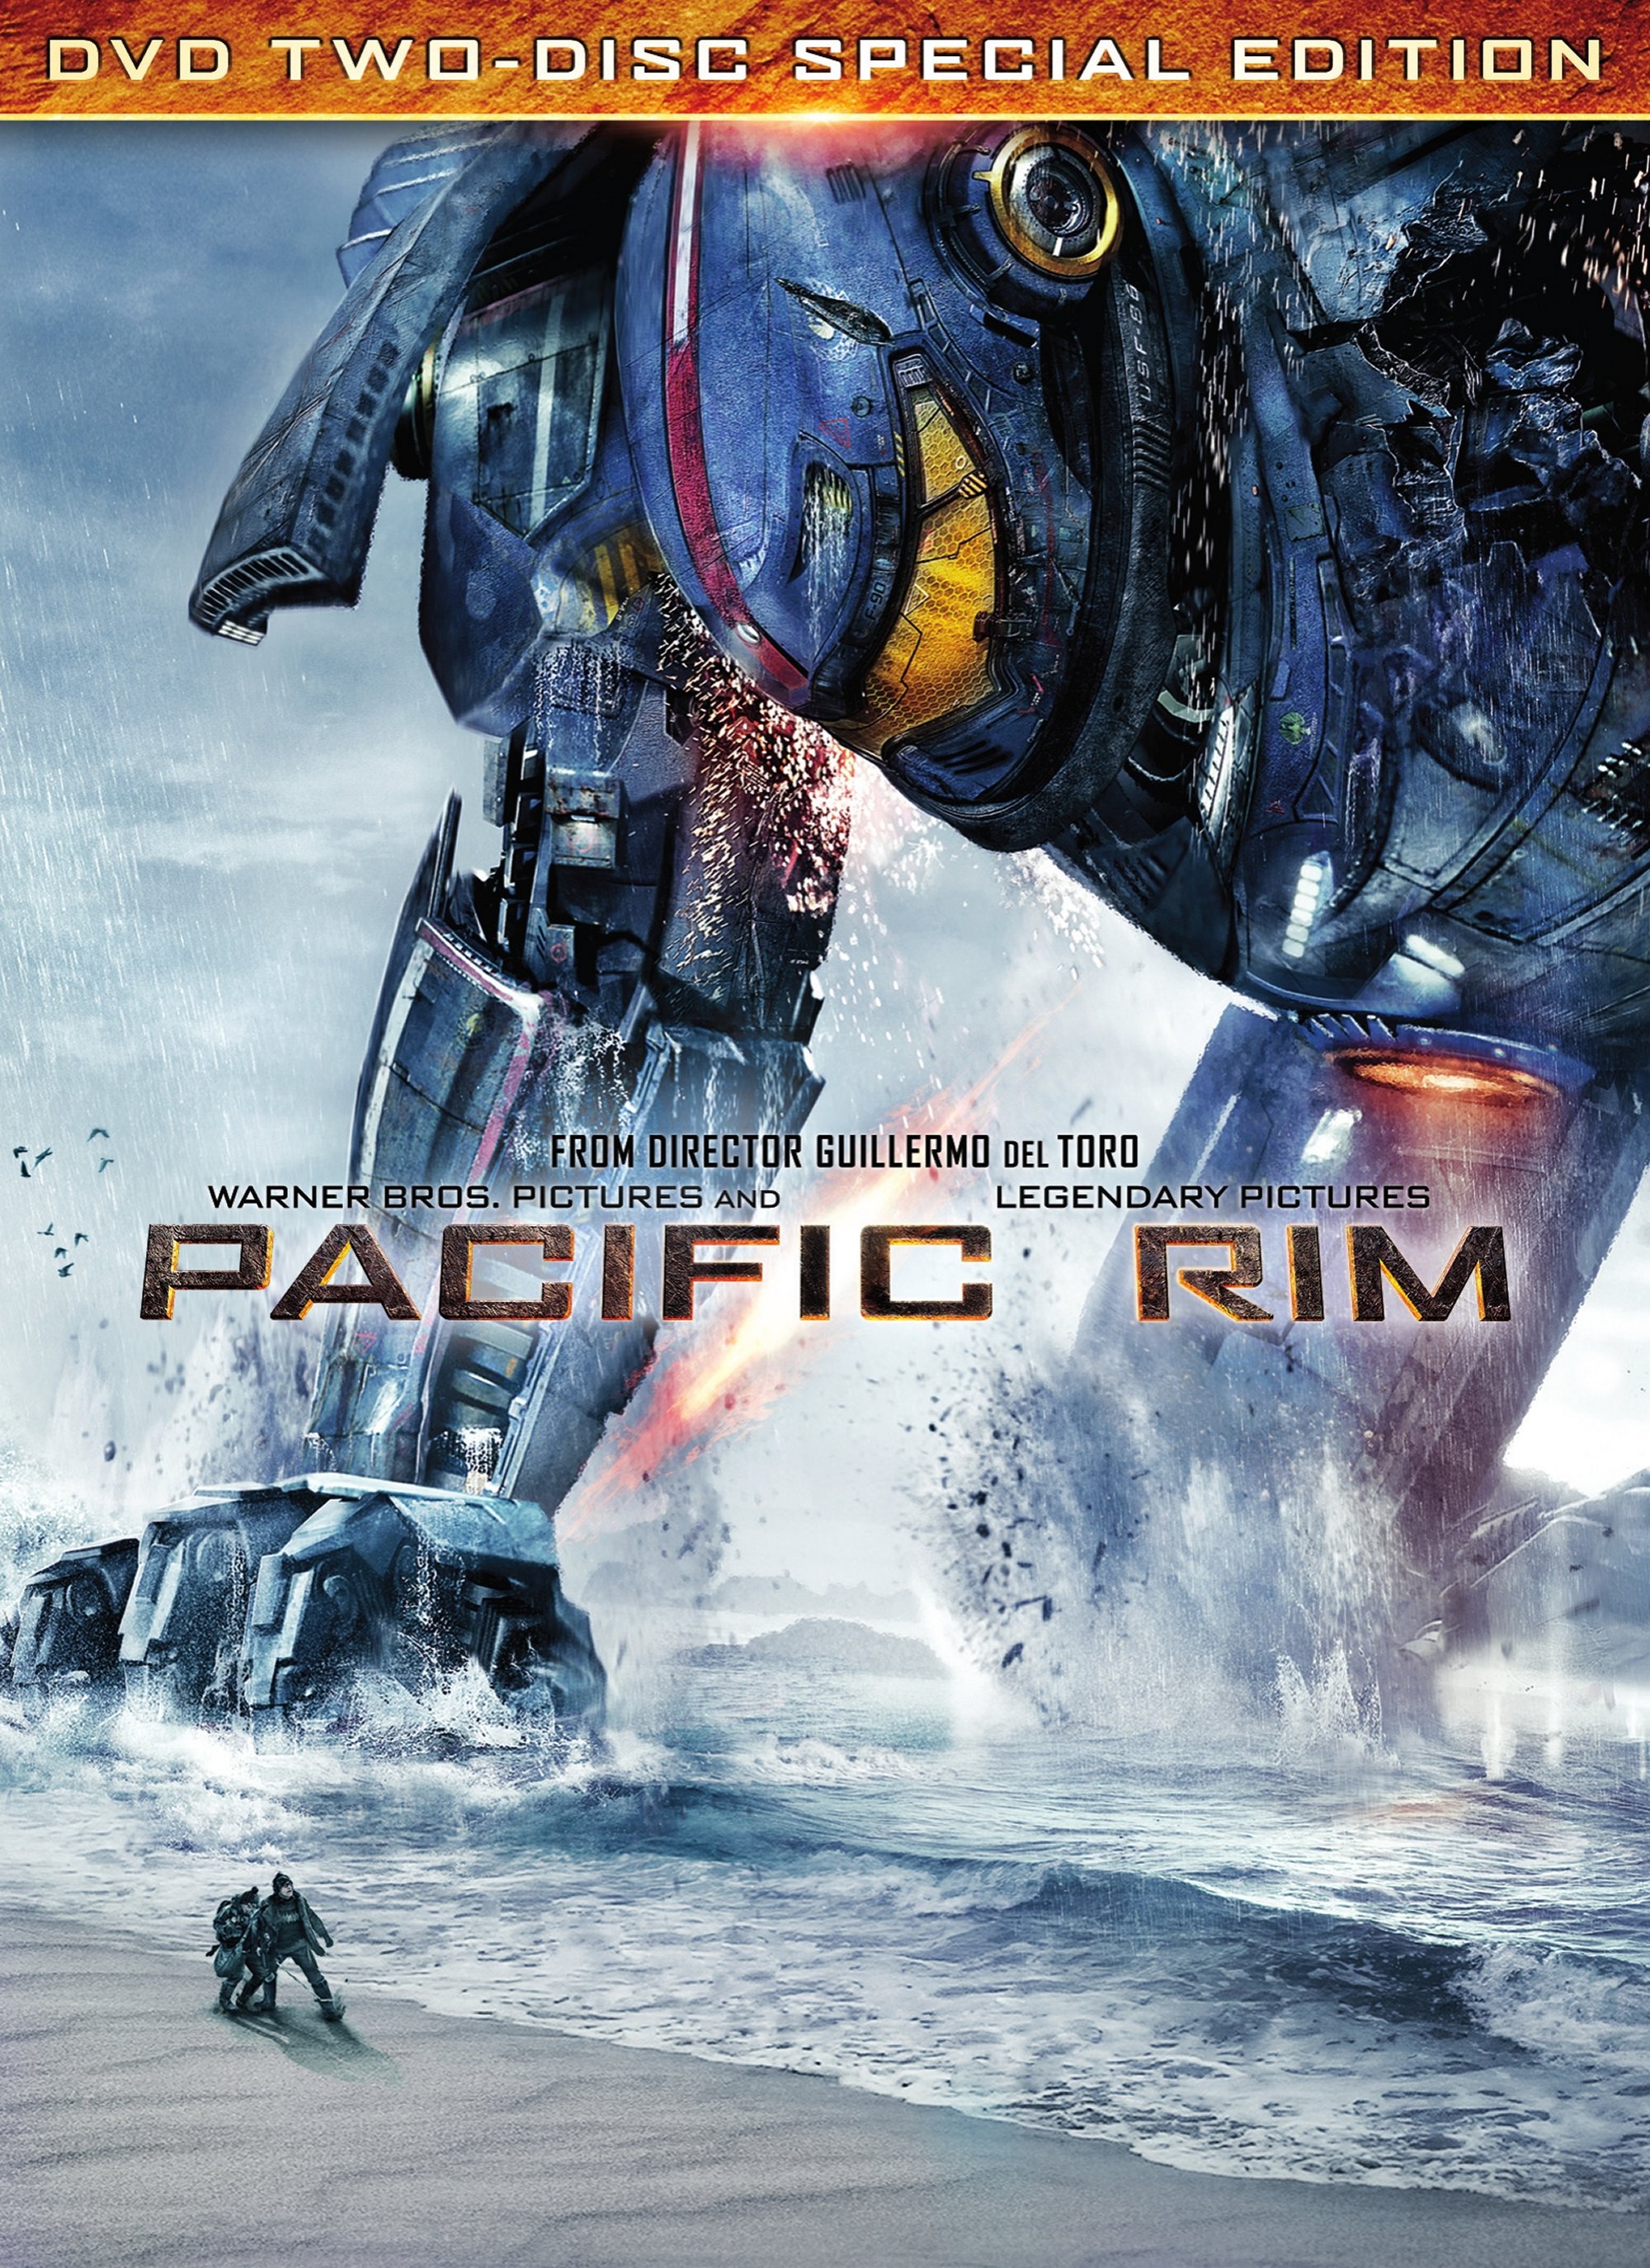 Pacific Rim (Special Edition) - DVD [ 2013 ]  - Action Movies On DVD - Movies On GRUV